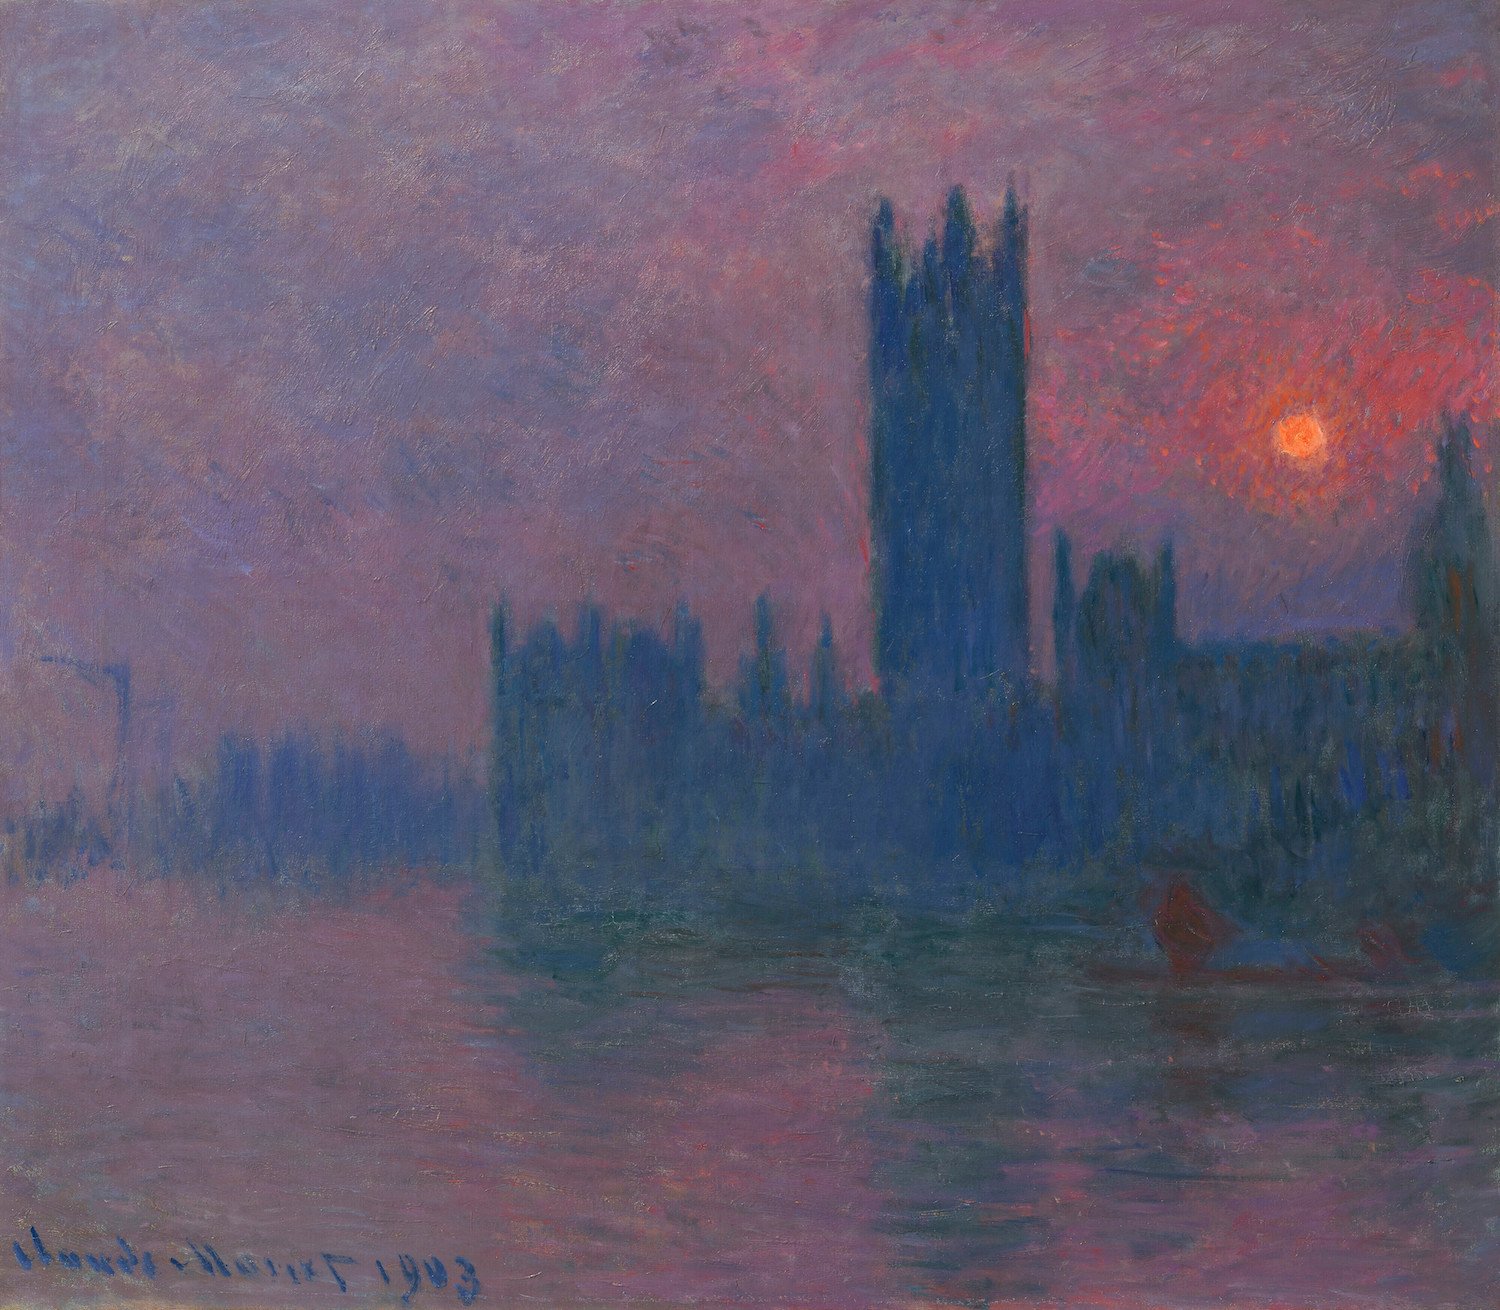 Monet — Mitchell at Fondation Louis Vuitton is the year's most